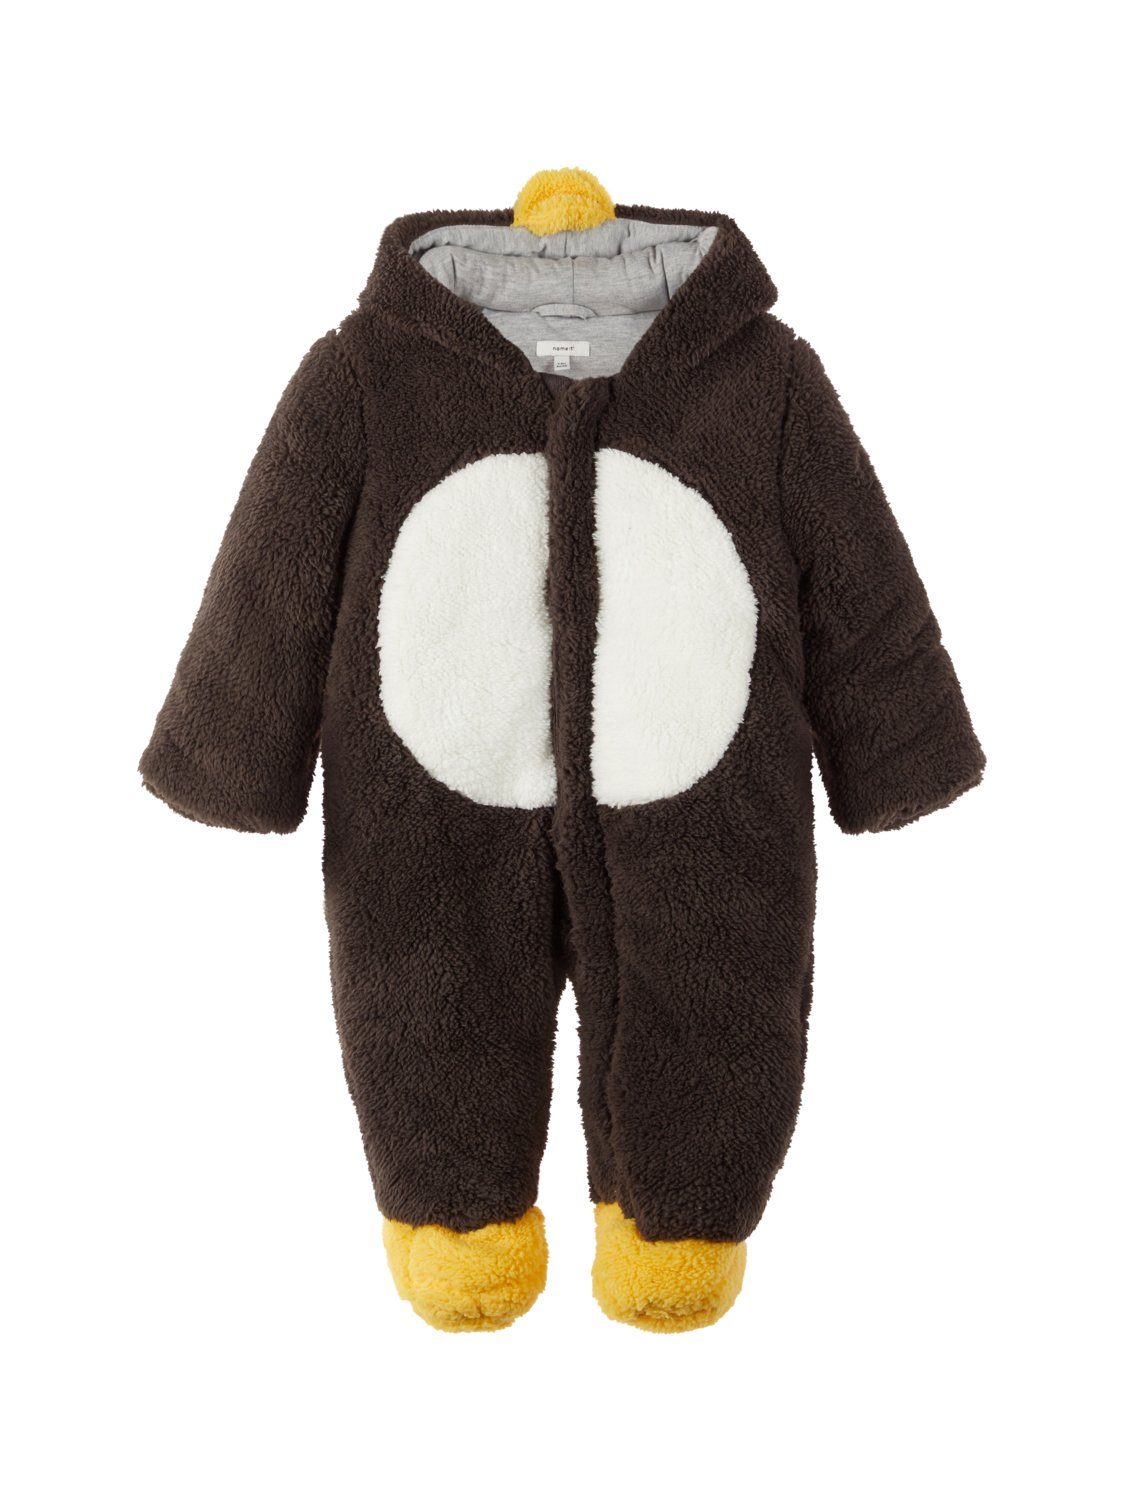 Schneeoverall It "Pinguin" It Name Baby Name Teddy-Schneeanzug Unisex